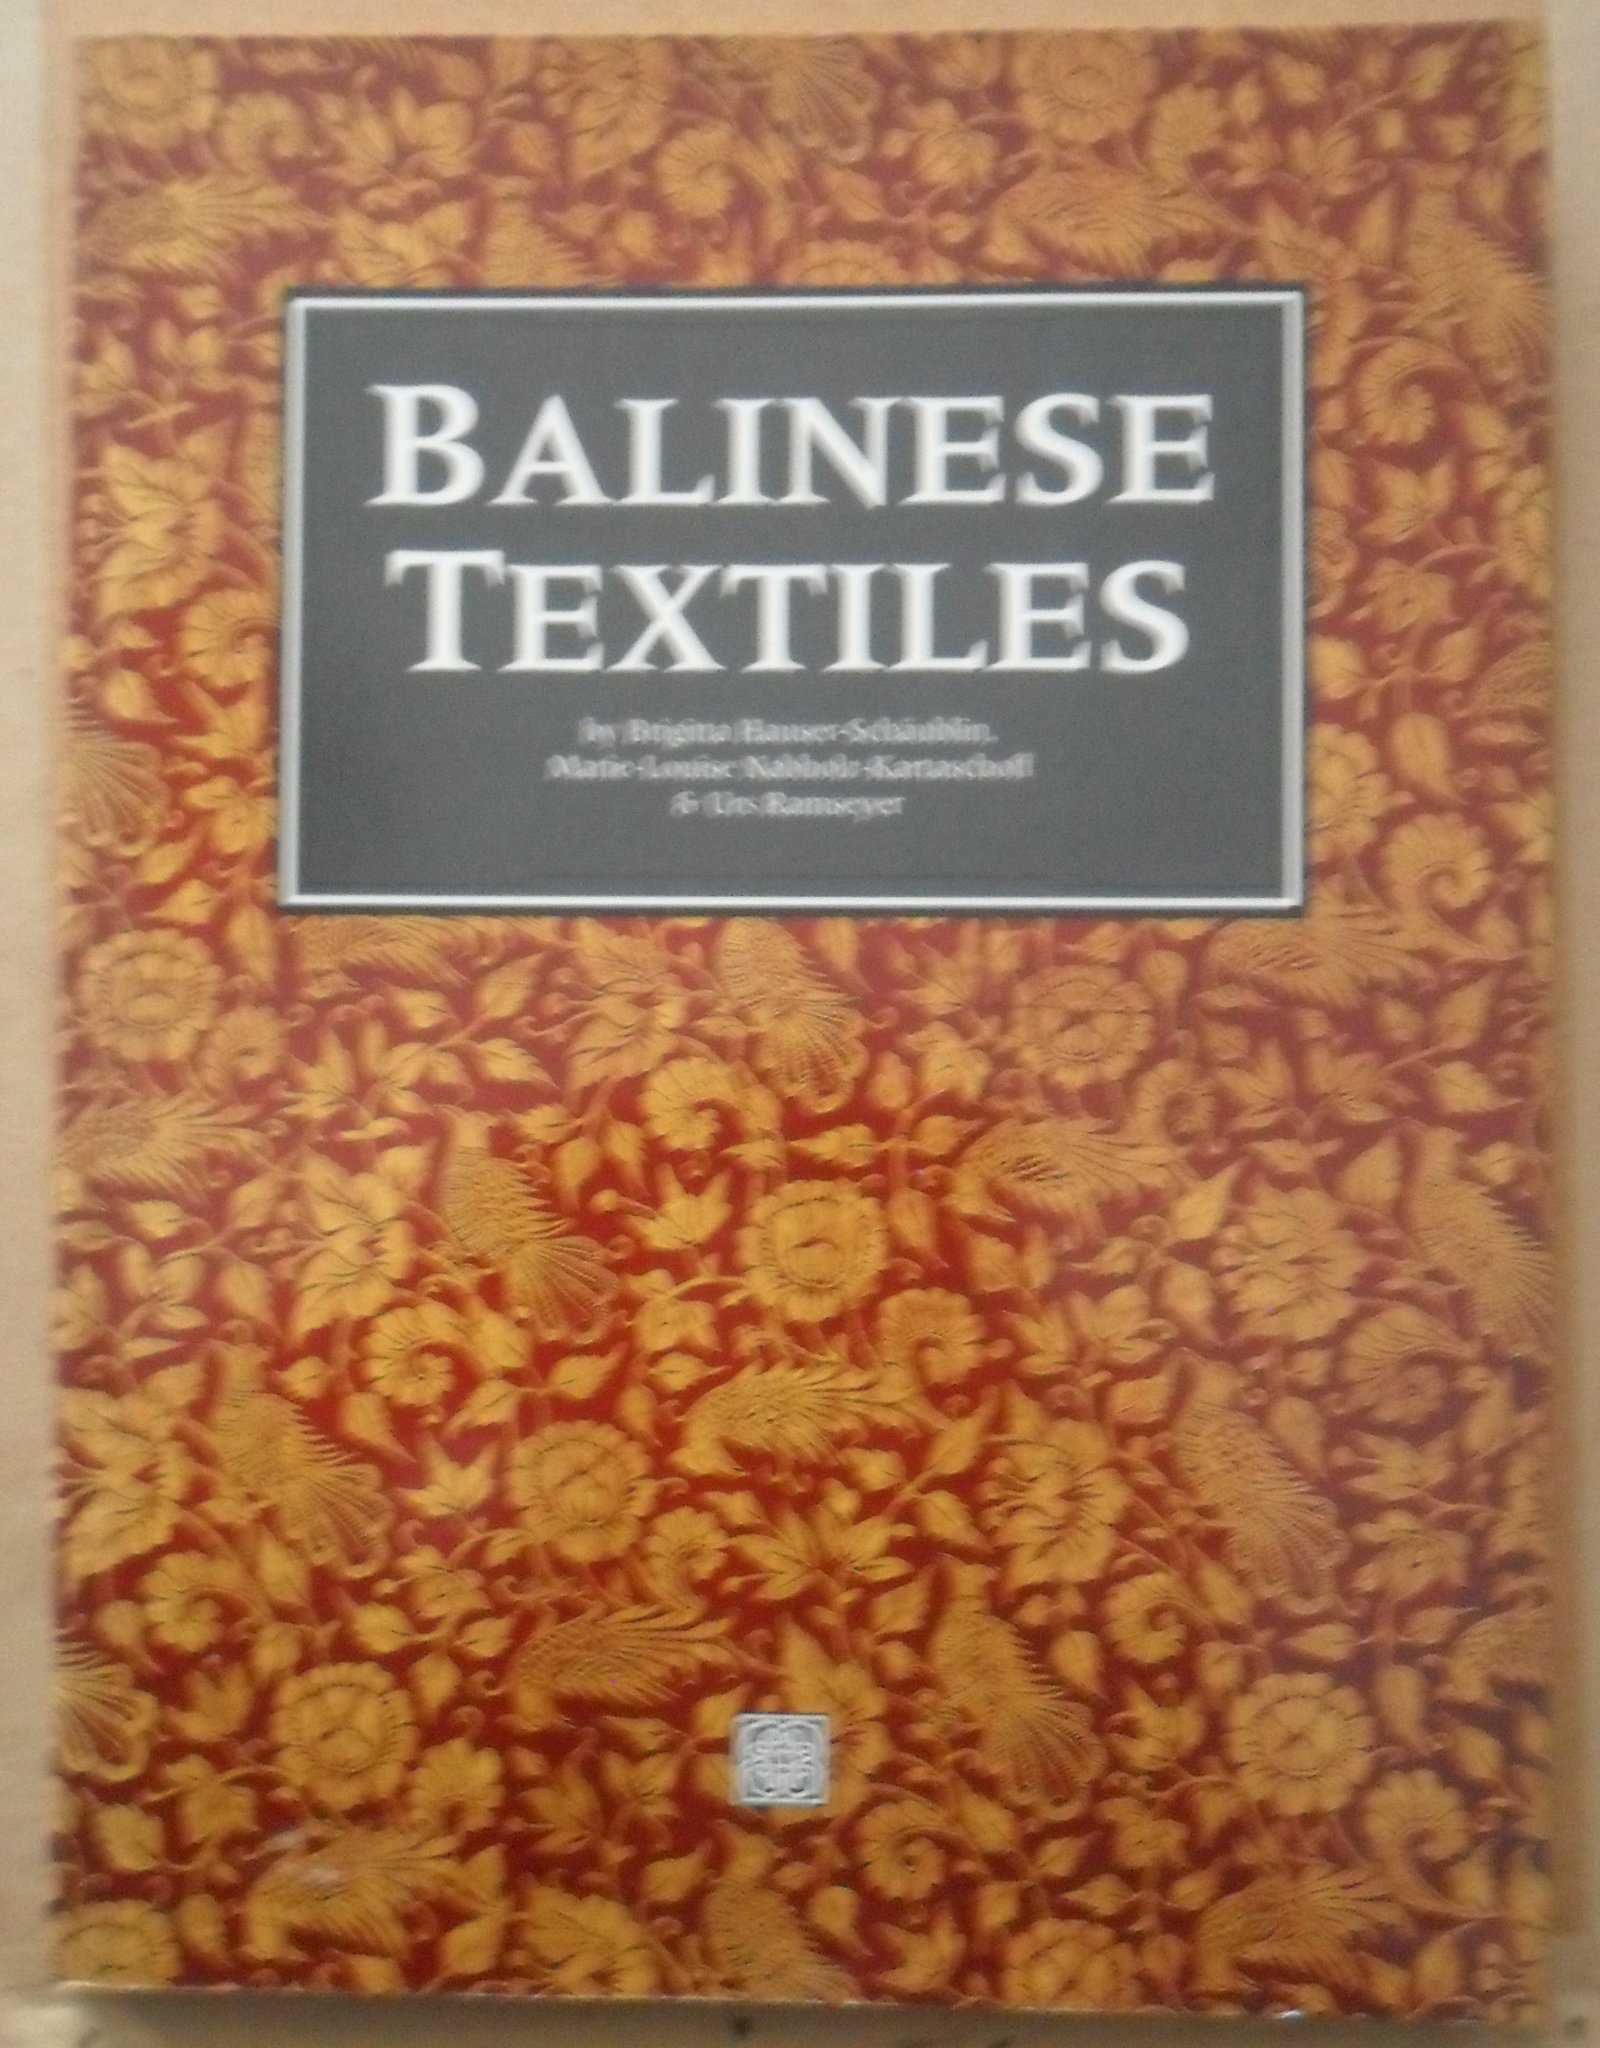 Balinese Textiles (Periplus Editions; 1997; Paperback)